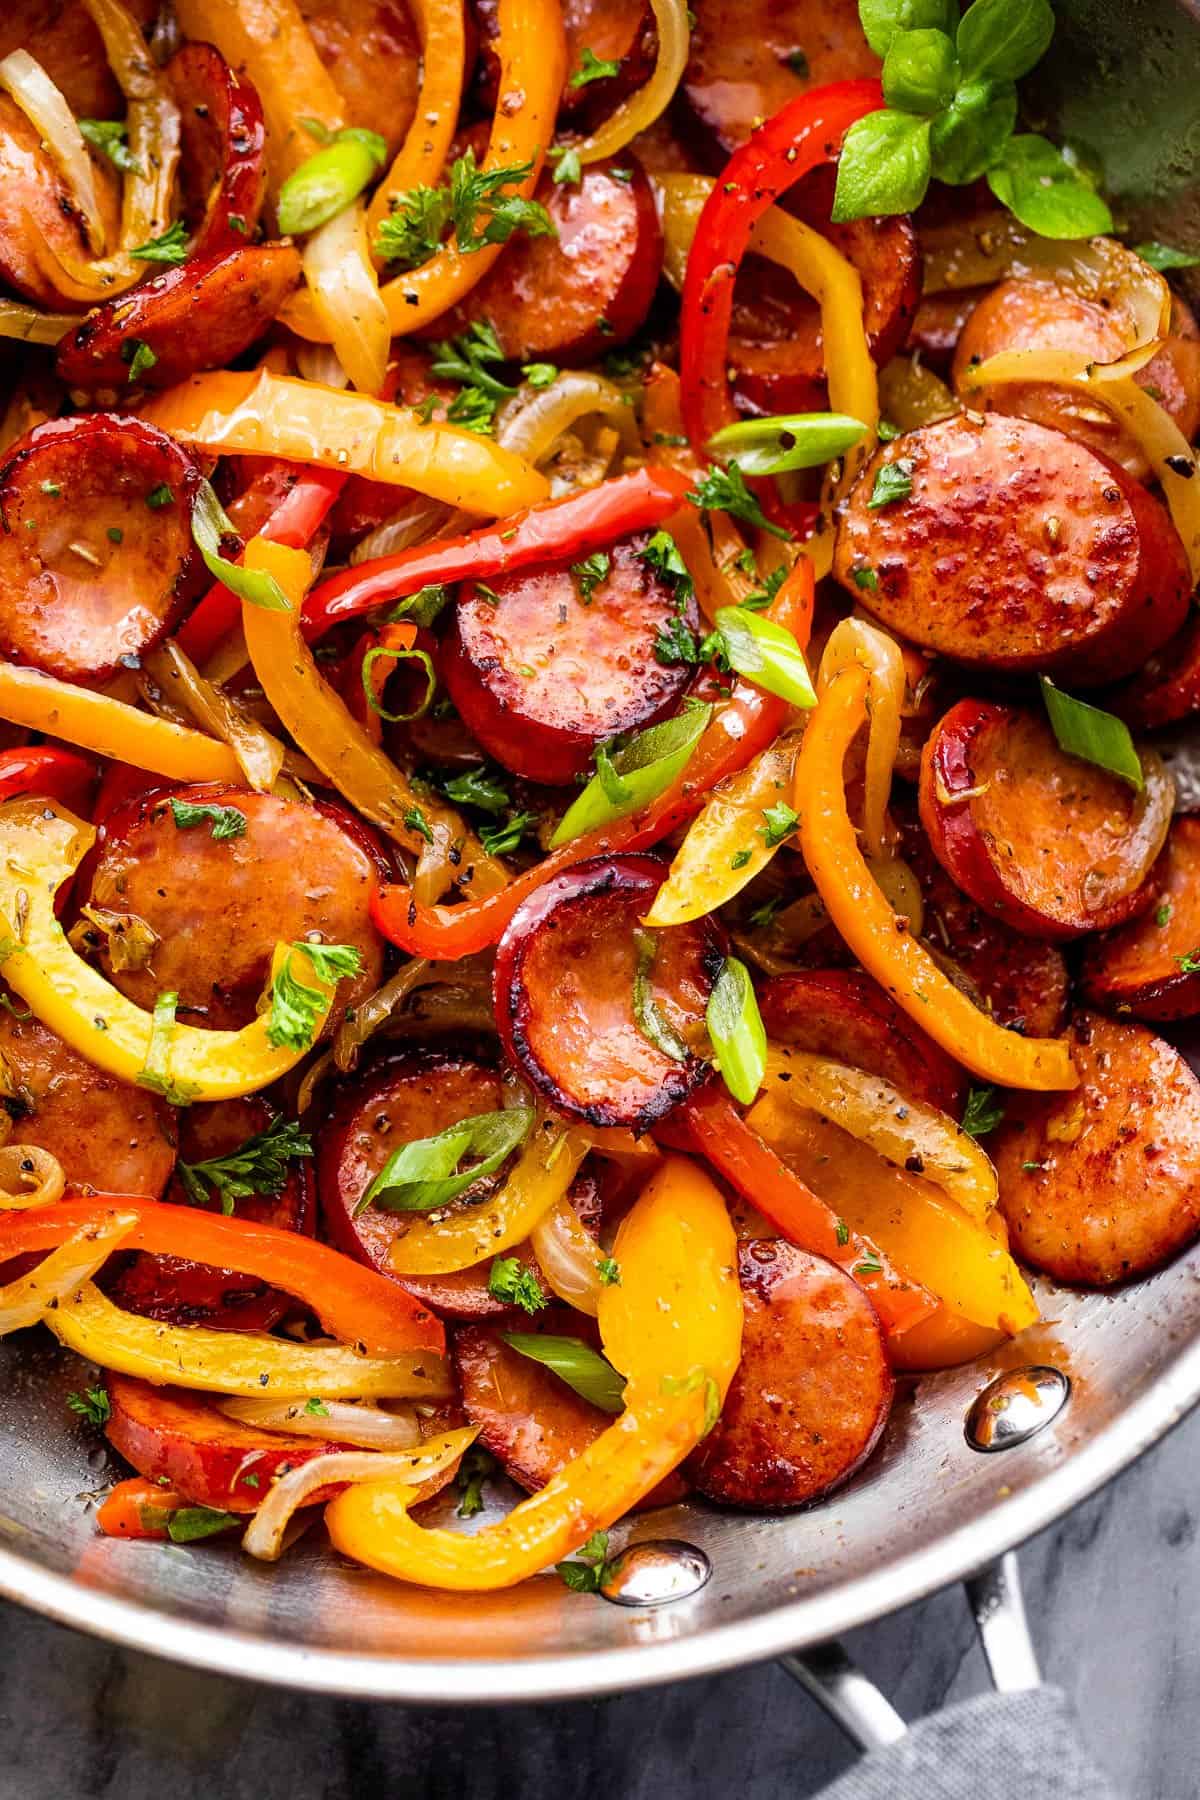 up close photo of sliced bell peppers, andouille sausage slices, and onions in a skillet